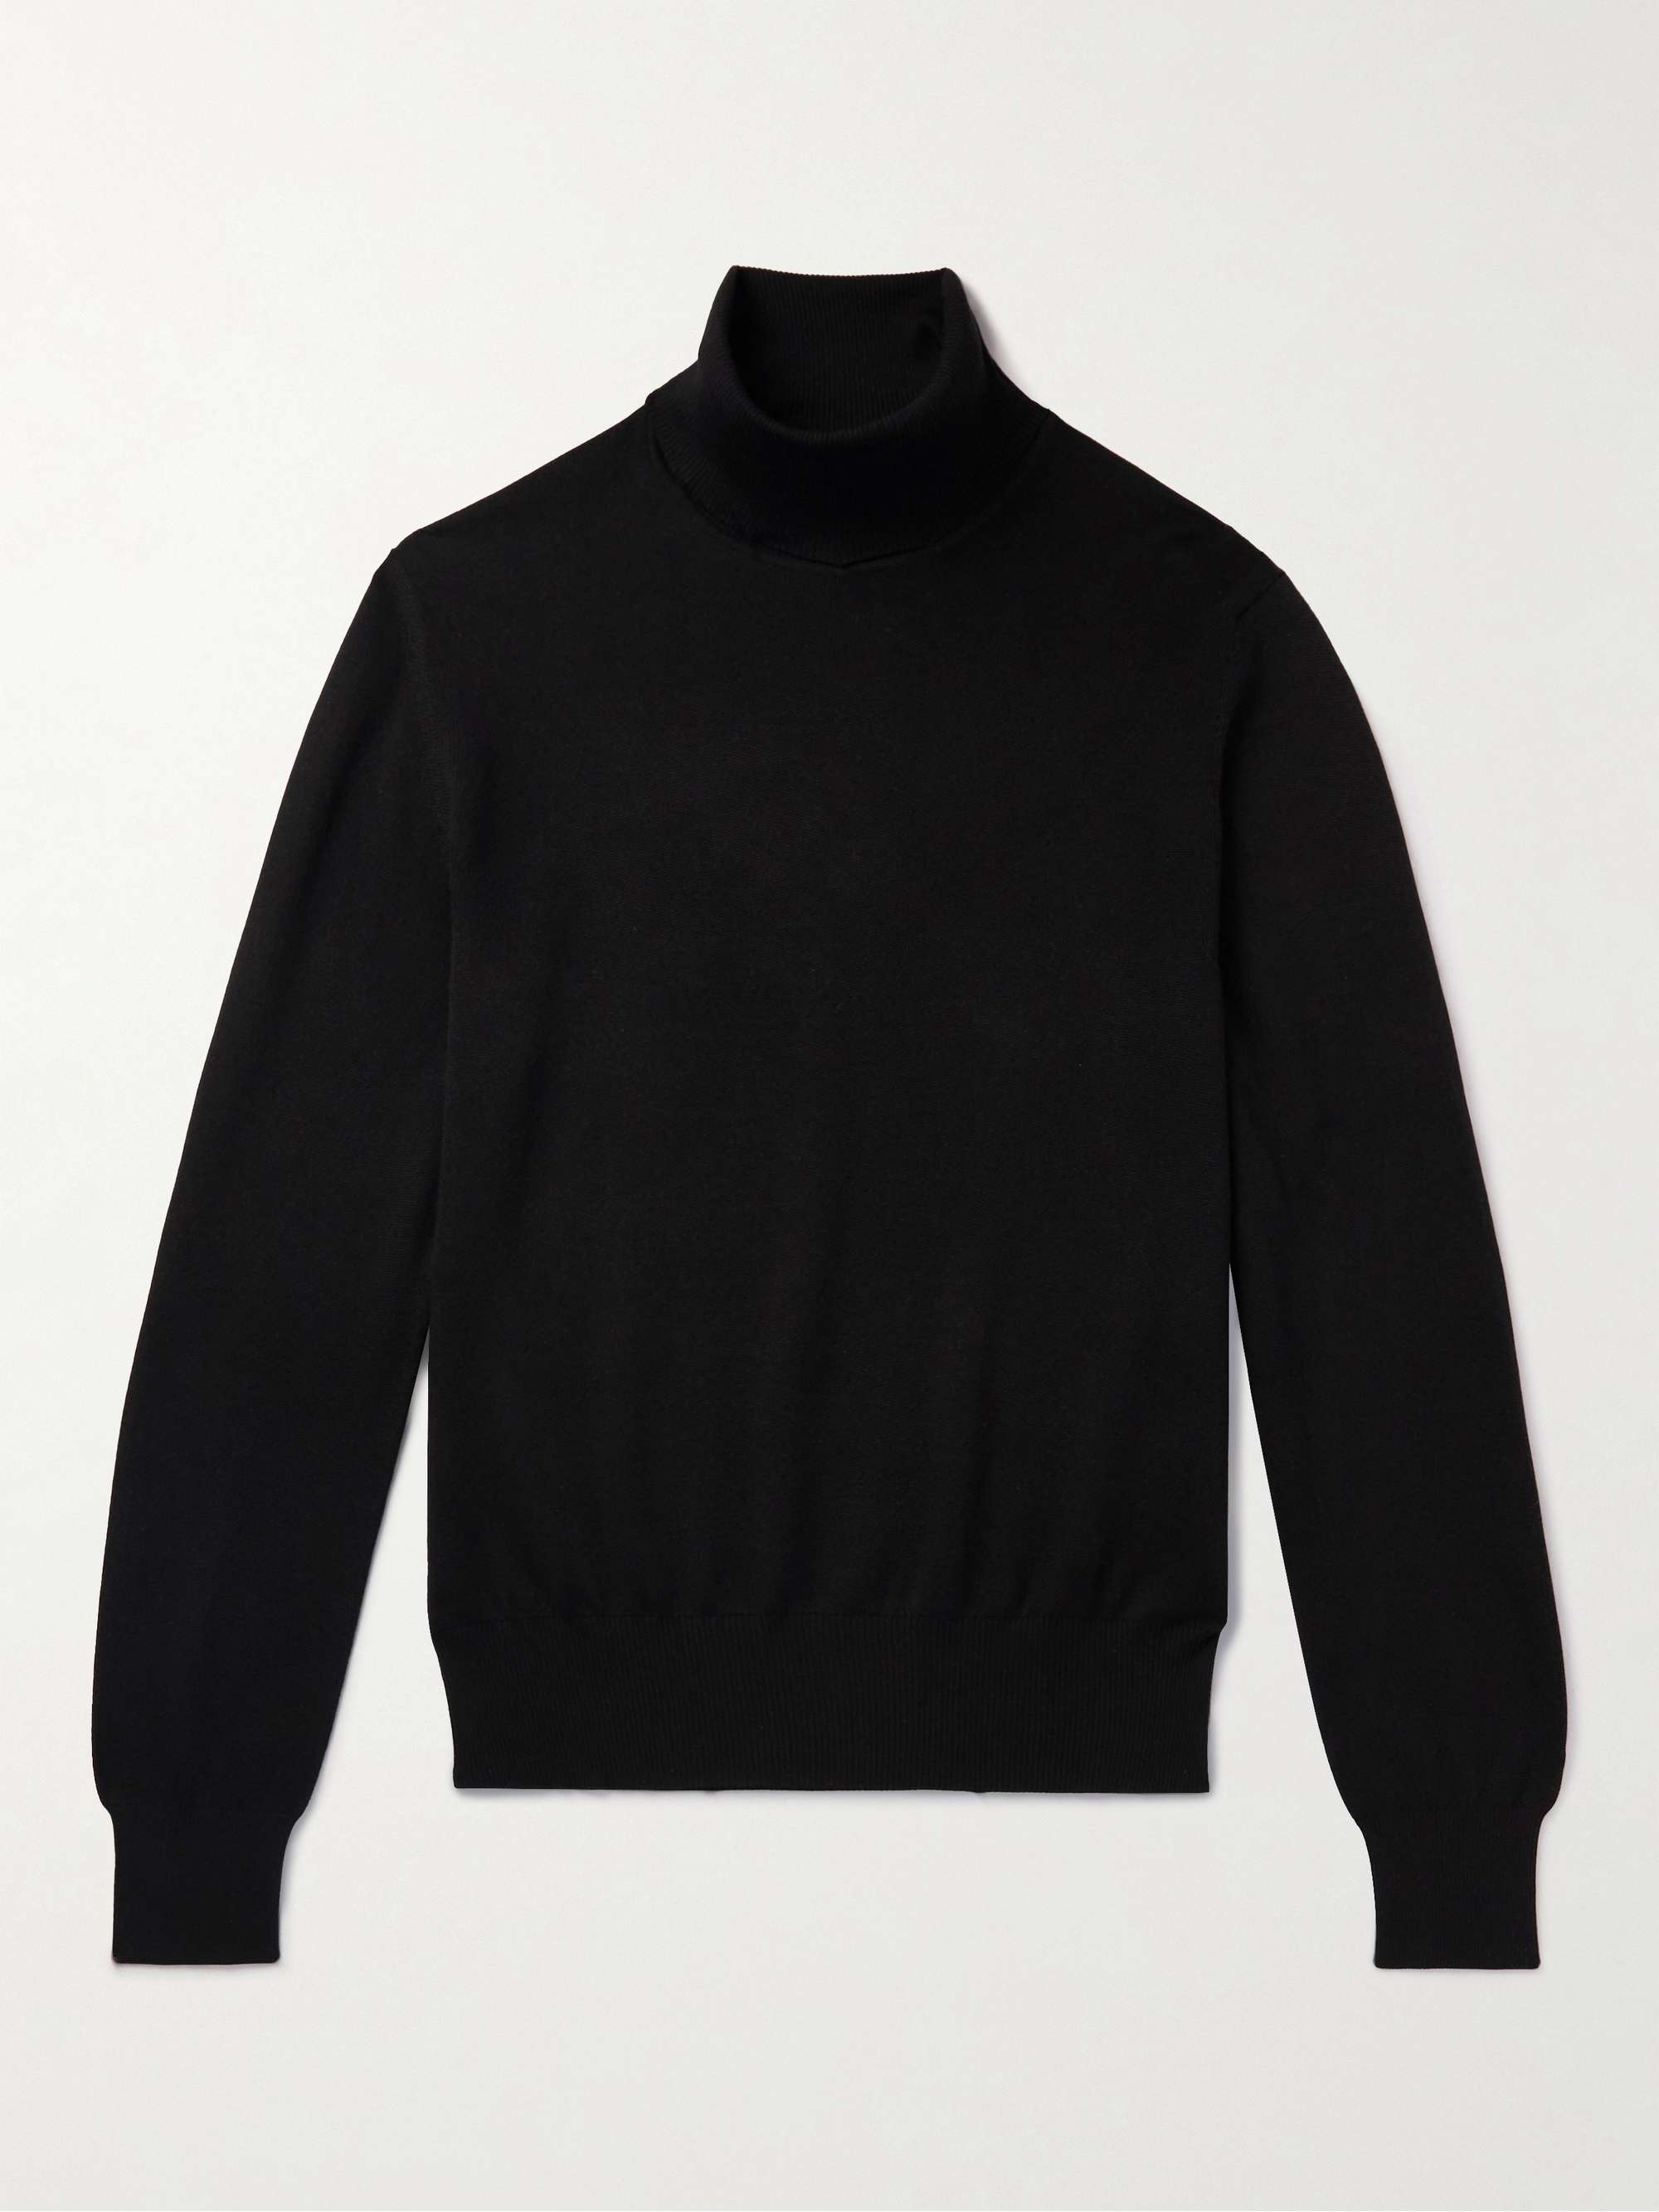 TOM FORD Mulberry Silk Rollneck Sweater